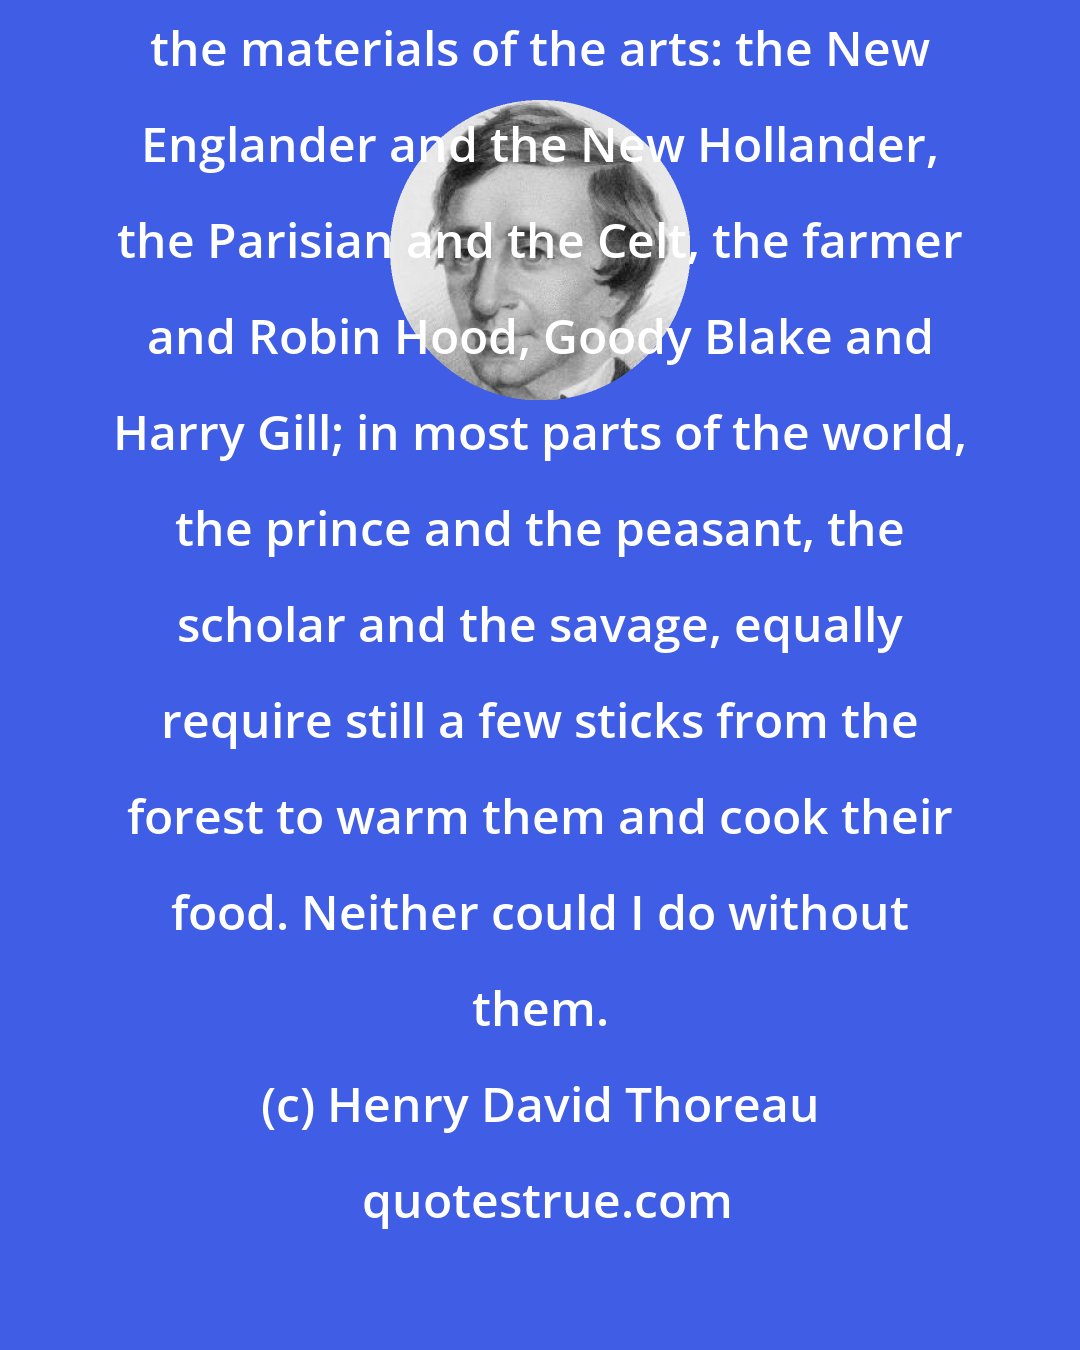 Henry David Thoreau: It is now many years that men have resorted to the forest for fuel and the materials of the arts: the New Englander and the New Hollander, the Parisian and the Celt, the farmer and Robin Hood, Goody Blake and Harry Gill; in most parts of the world, the prince and the peasant, the scholar and the savage, equally require still a few sticks from the forest to warm them and cook their food. Neither could I do without them.